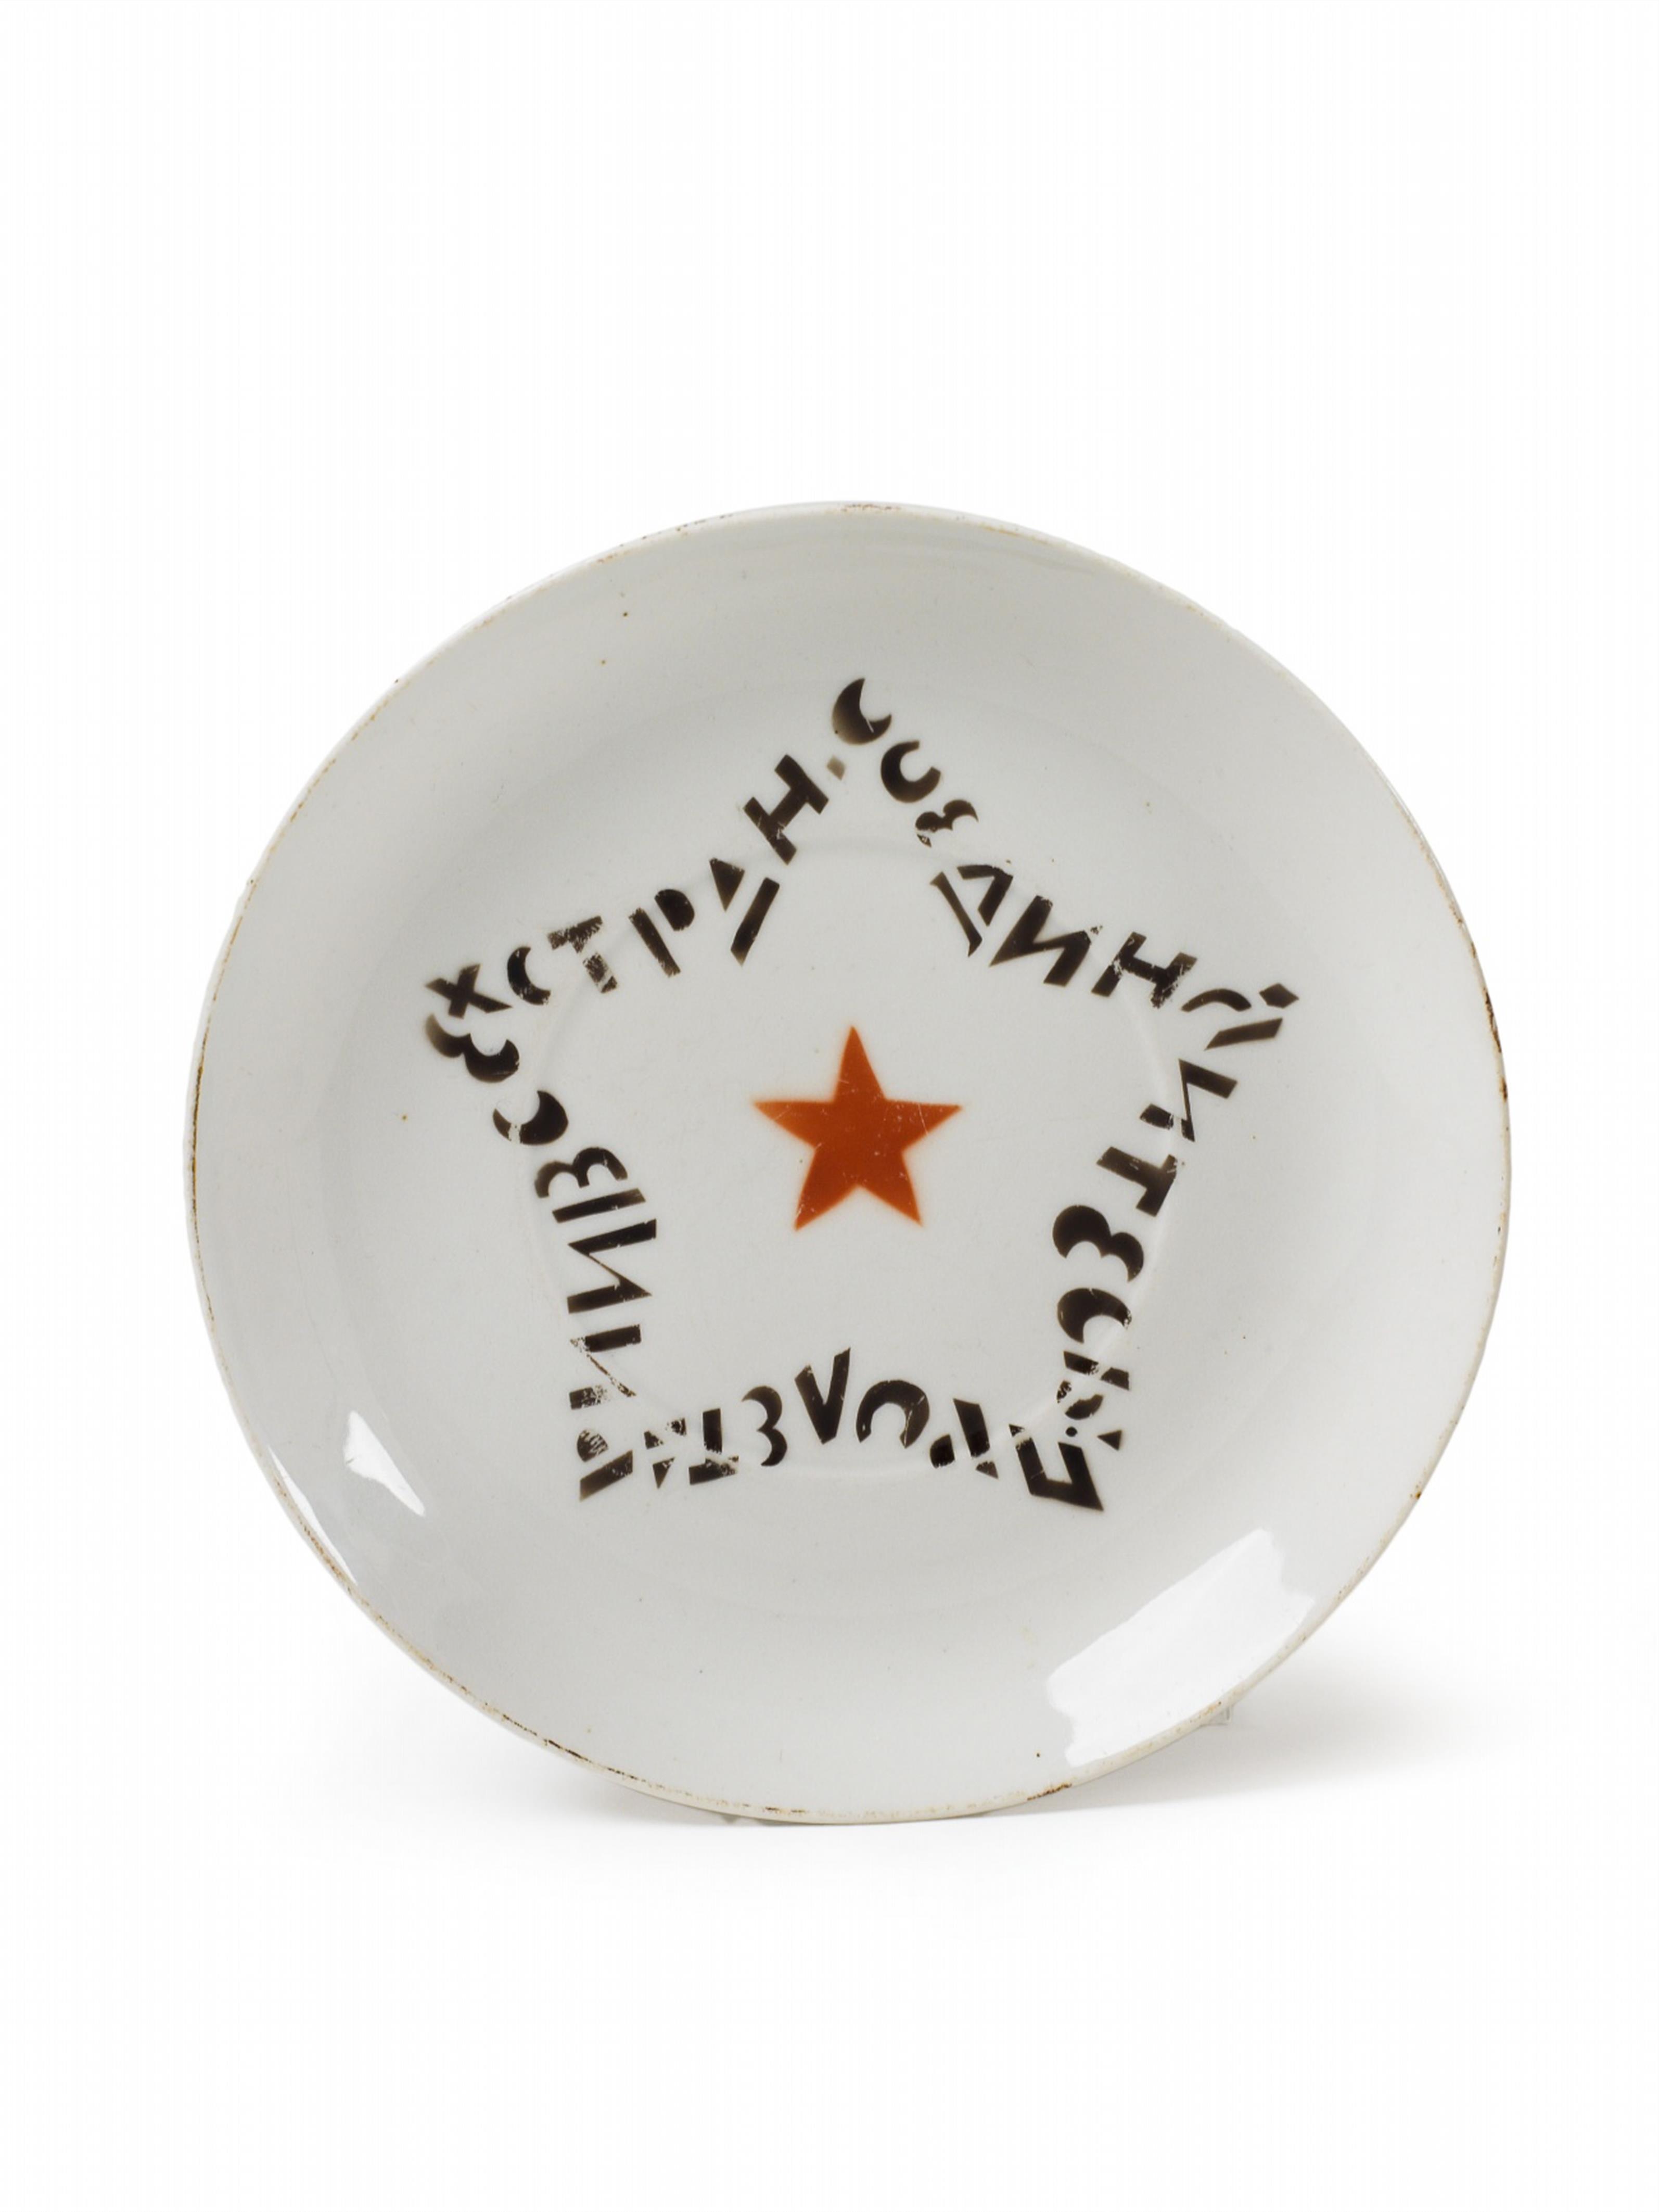 A slightly scalloped round porcelain dish with stencilled and painted decor, inscribed "Proletariat of all nations unite". - image-1